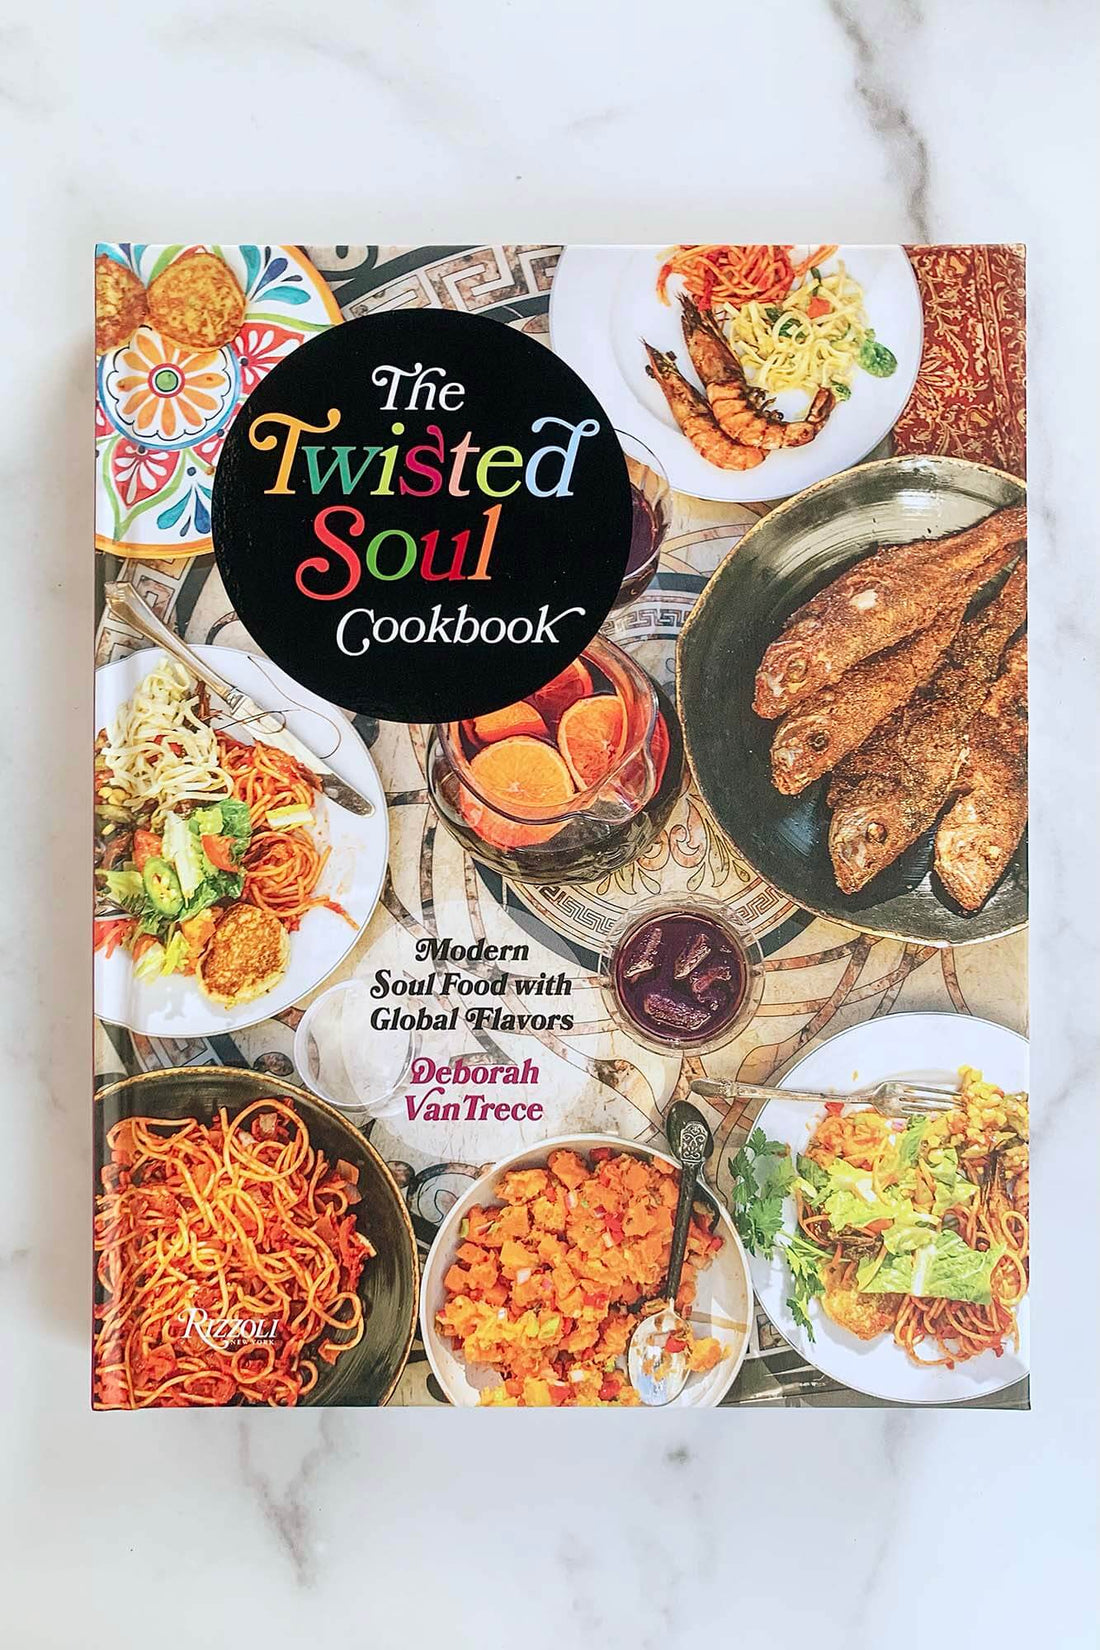 The Twisted Soul Cookbook